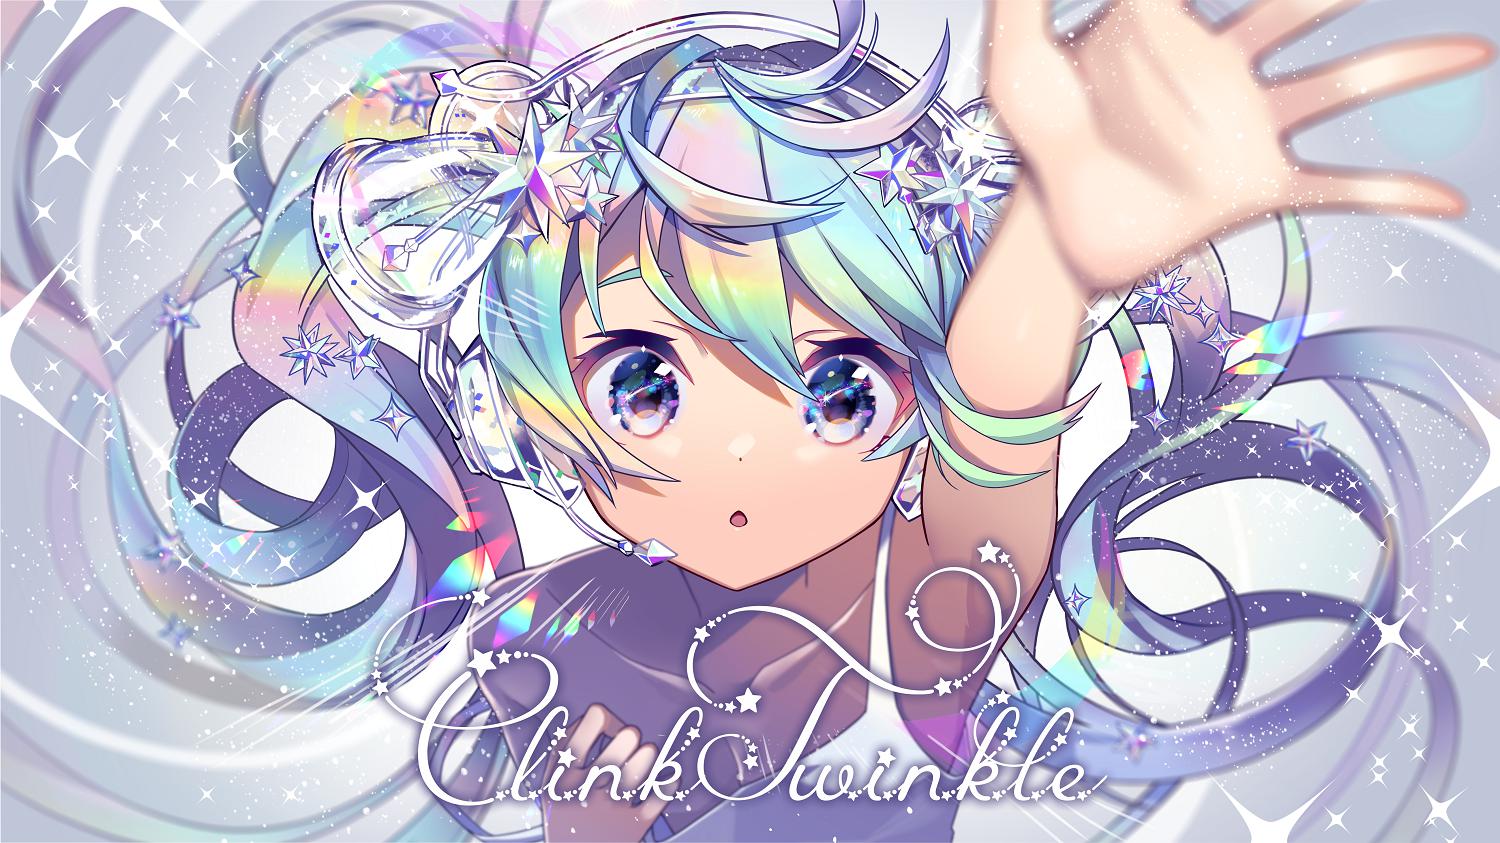 Clink Twinkle-VOCALOID初音未来